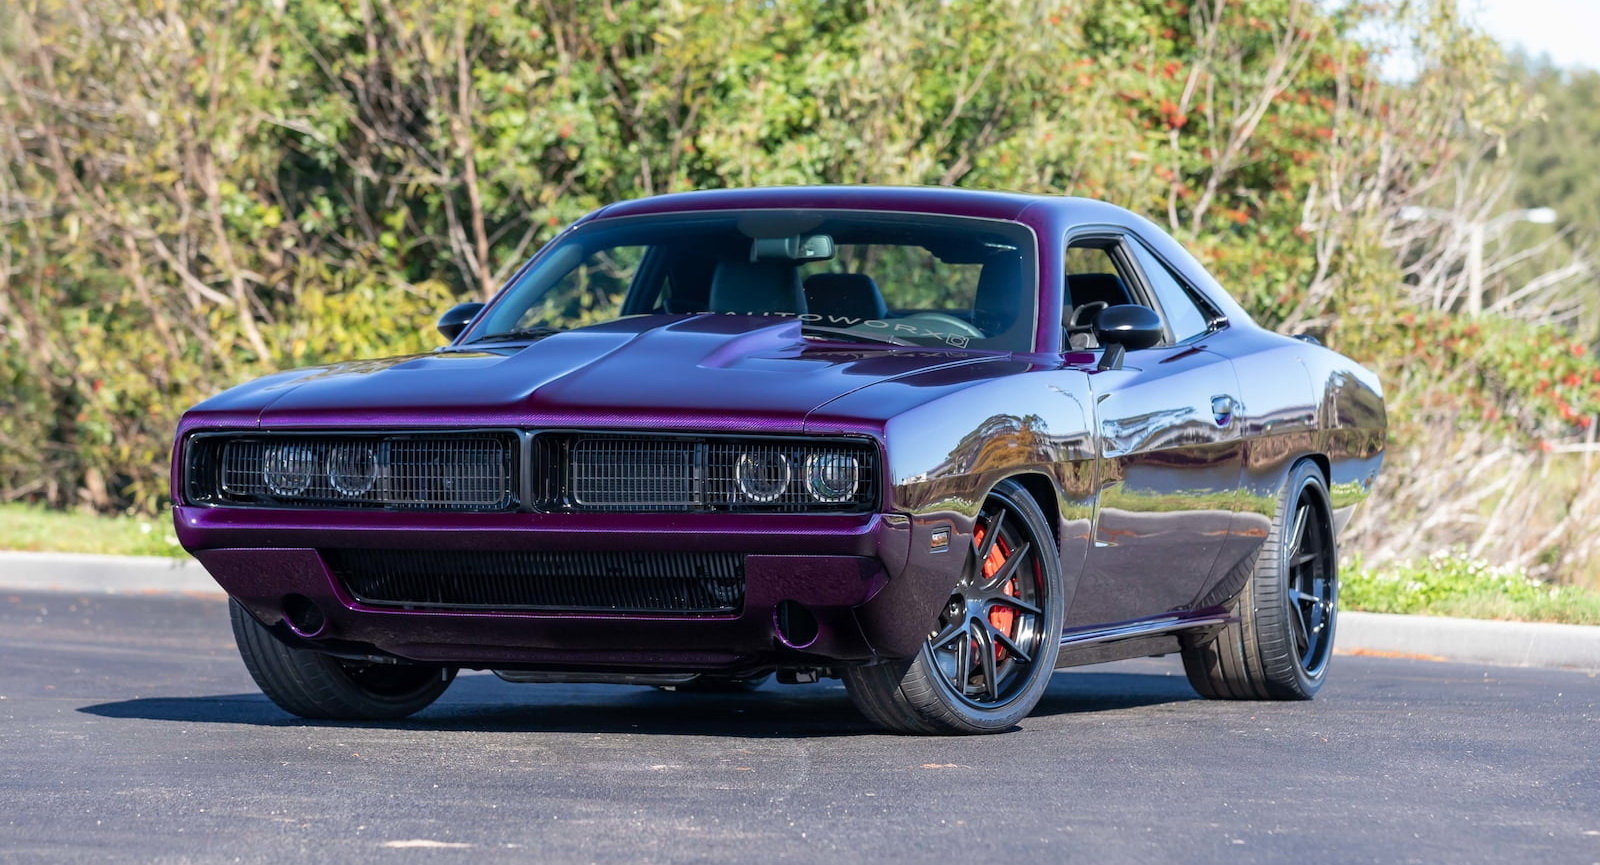 2019 Dodge Challenger Hellcat Wears Carbon 1969 Charger Body Like A Glove |  Carscoops